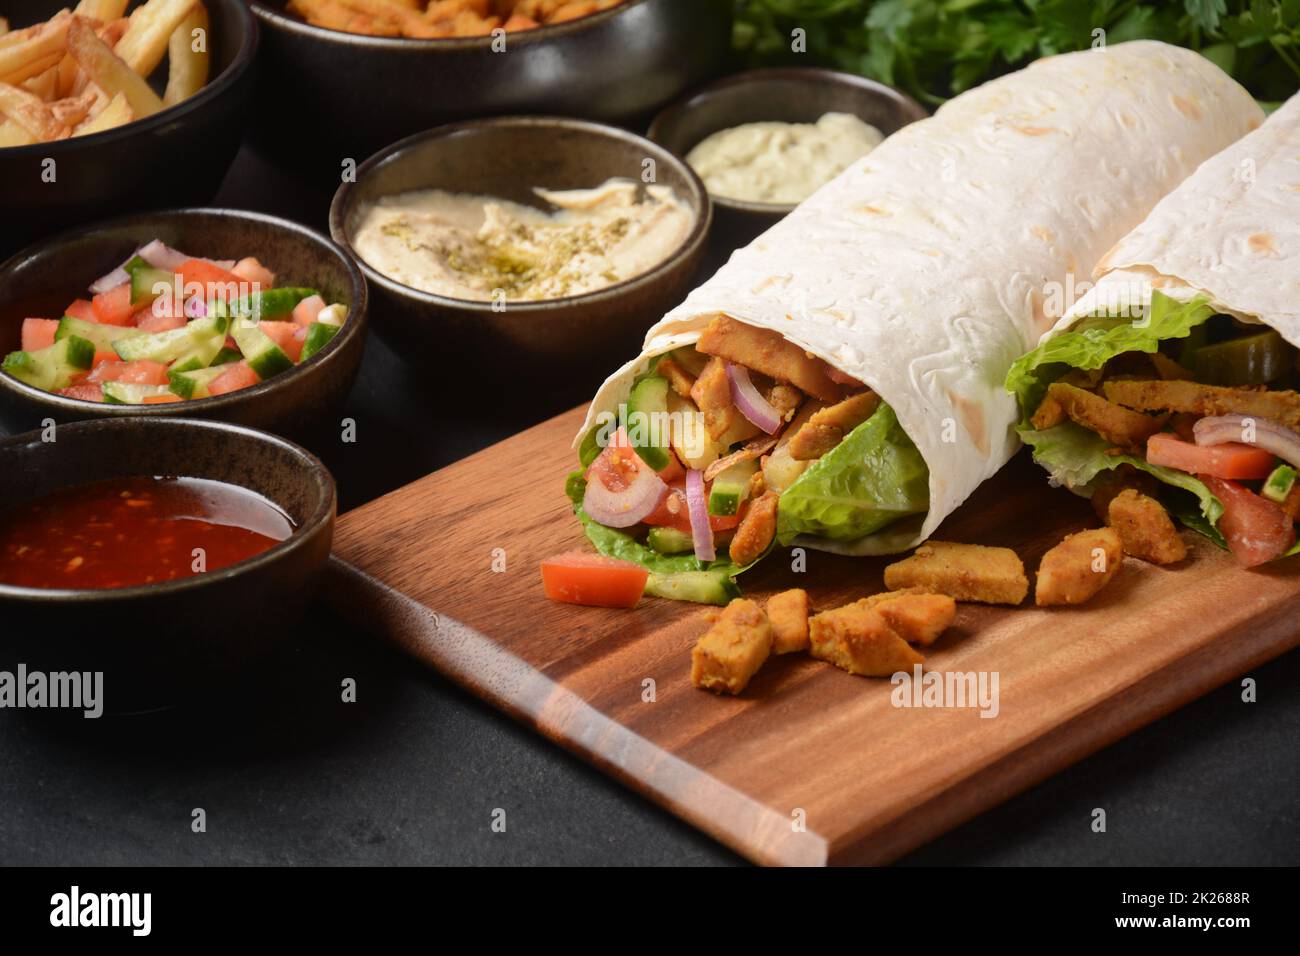 Shawarma Rolled Sandwich with Sauce and vegetables, Arab Traditional Food. Shawarma Doner kebab wrap with chicken, fries and pickles. Israeli Traditional homemade Shawarma on wooden cutting board. Stock Photo